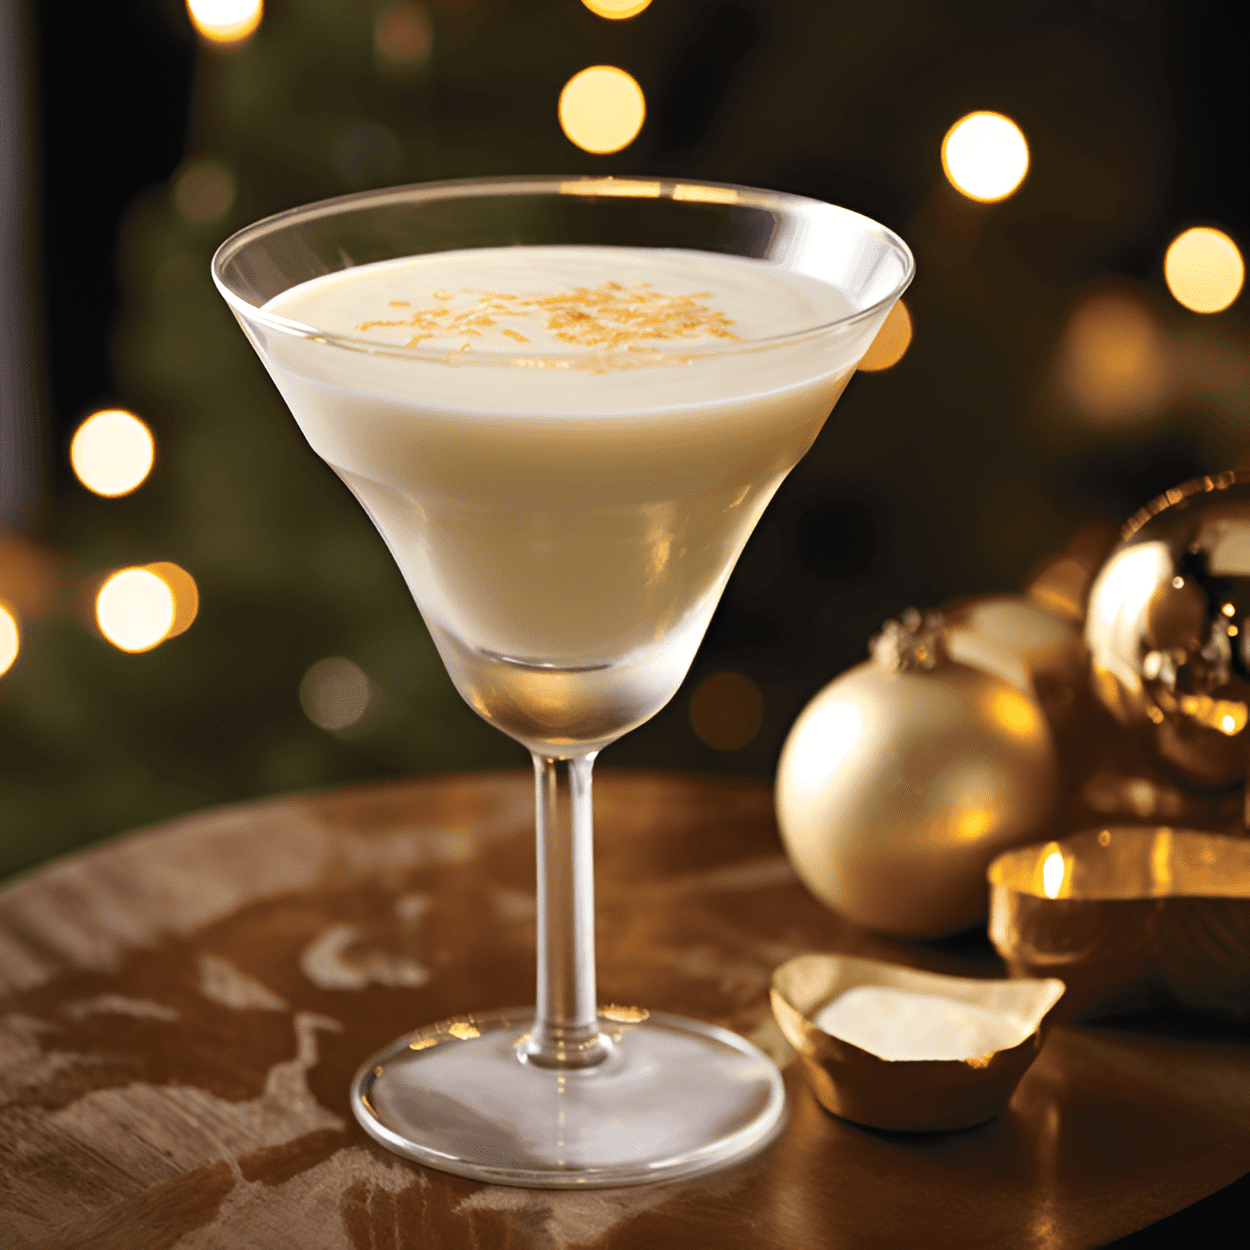 Snow White Cocktail Recipe - The Snow White cocktail is a sweet, creamy, and indulgent drink. The white chocolate liqueur gives it a rich and velvety sweetness, while the vodka adds a slight kick. The cream rounds it all off, making it a smooth and decadent treat.